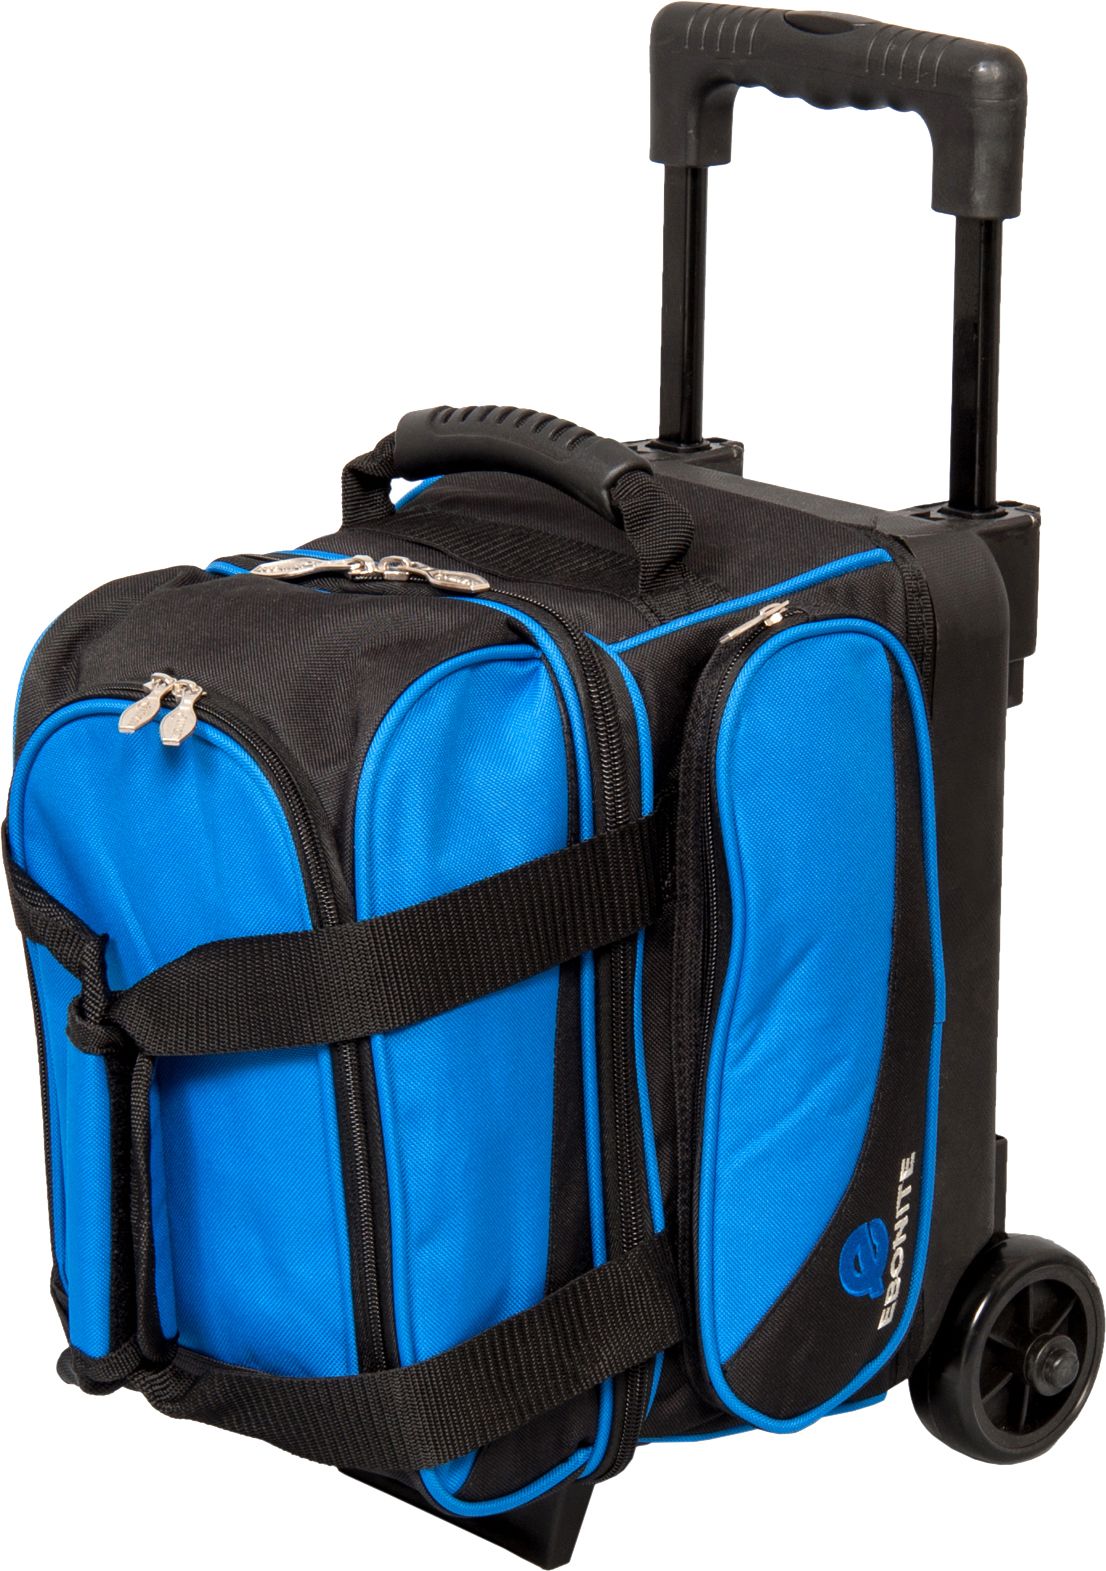 Bowling Bags & Bowling Ball Bags | Best Price Guarantee at DICK'S